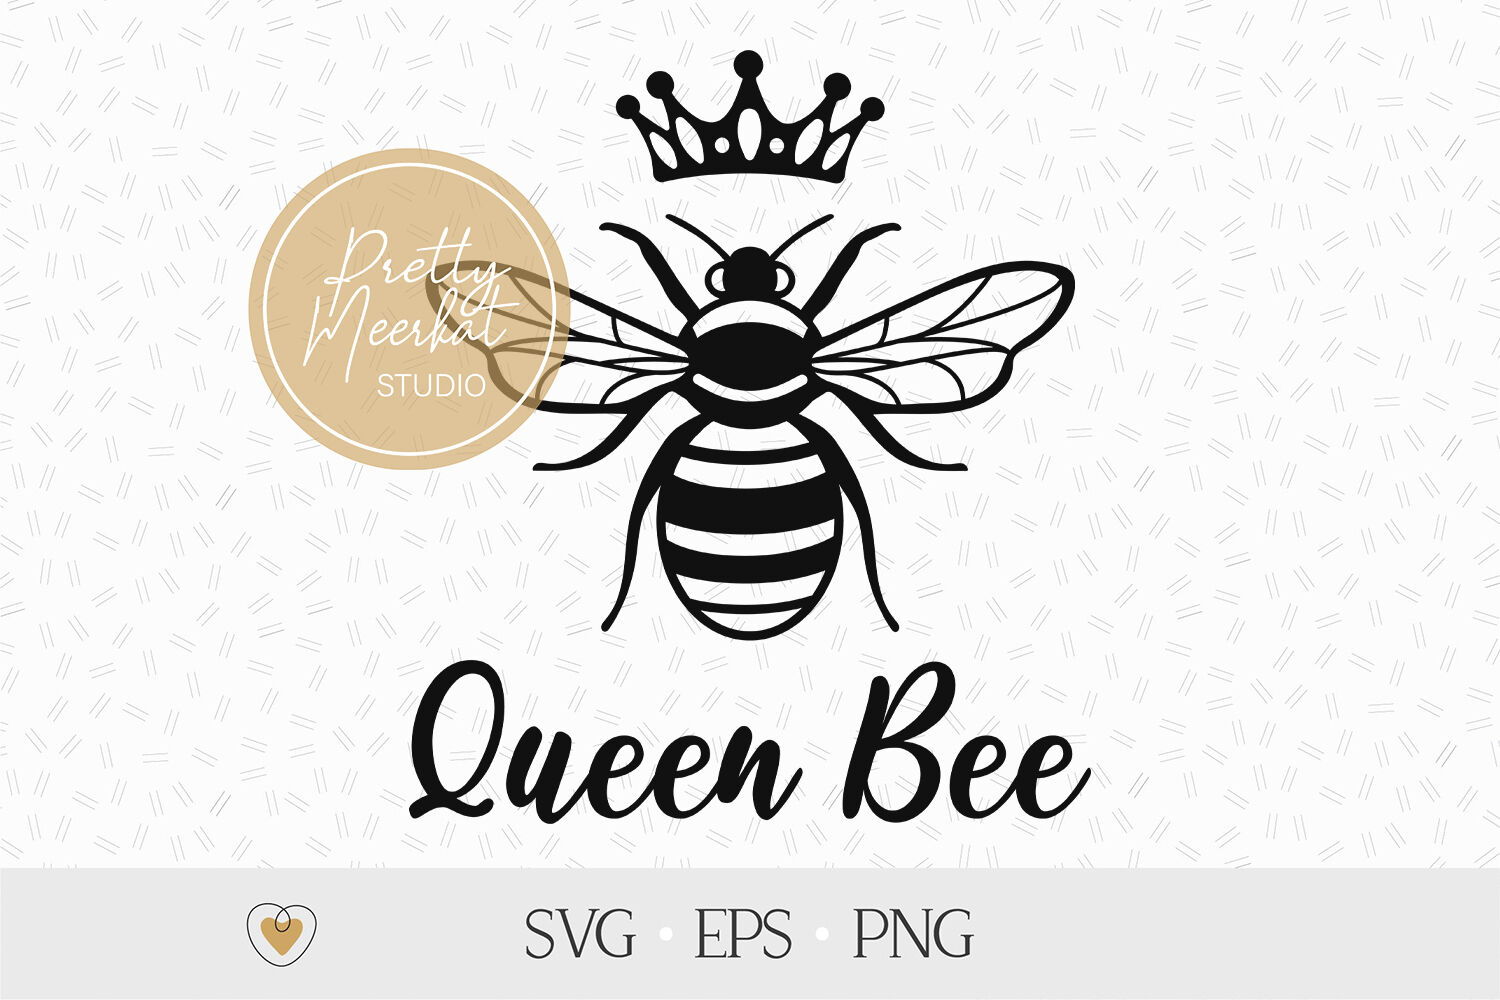 Bee svg, Queen bee svg, cut file, png By Pretty Meerkat | TheHungryJPEG